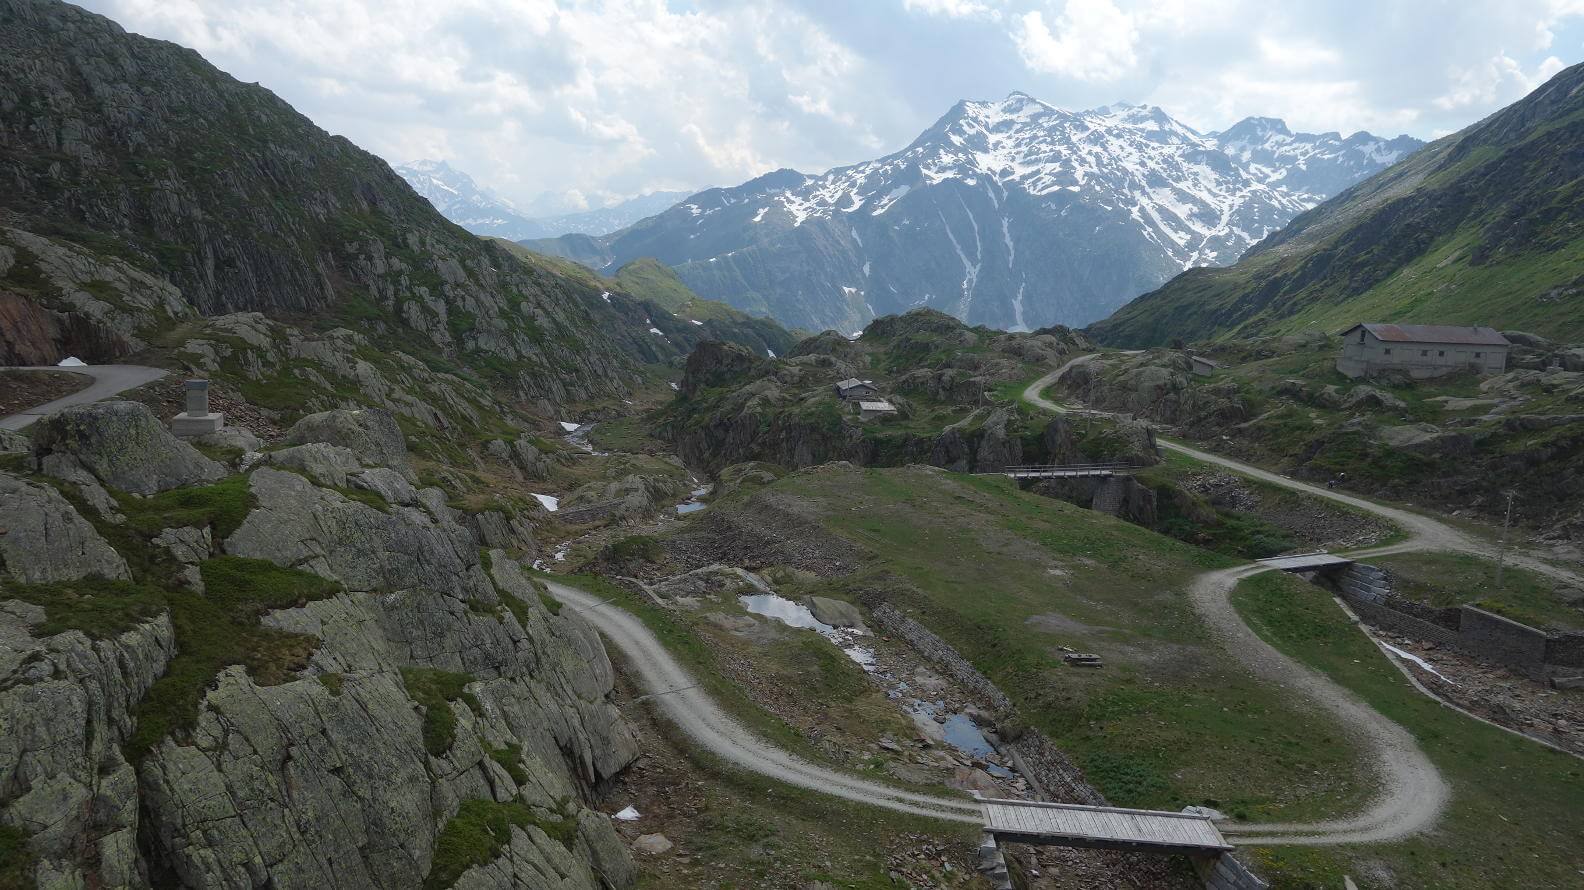 Looking south from the dam on Gotthard Pass.